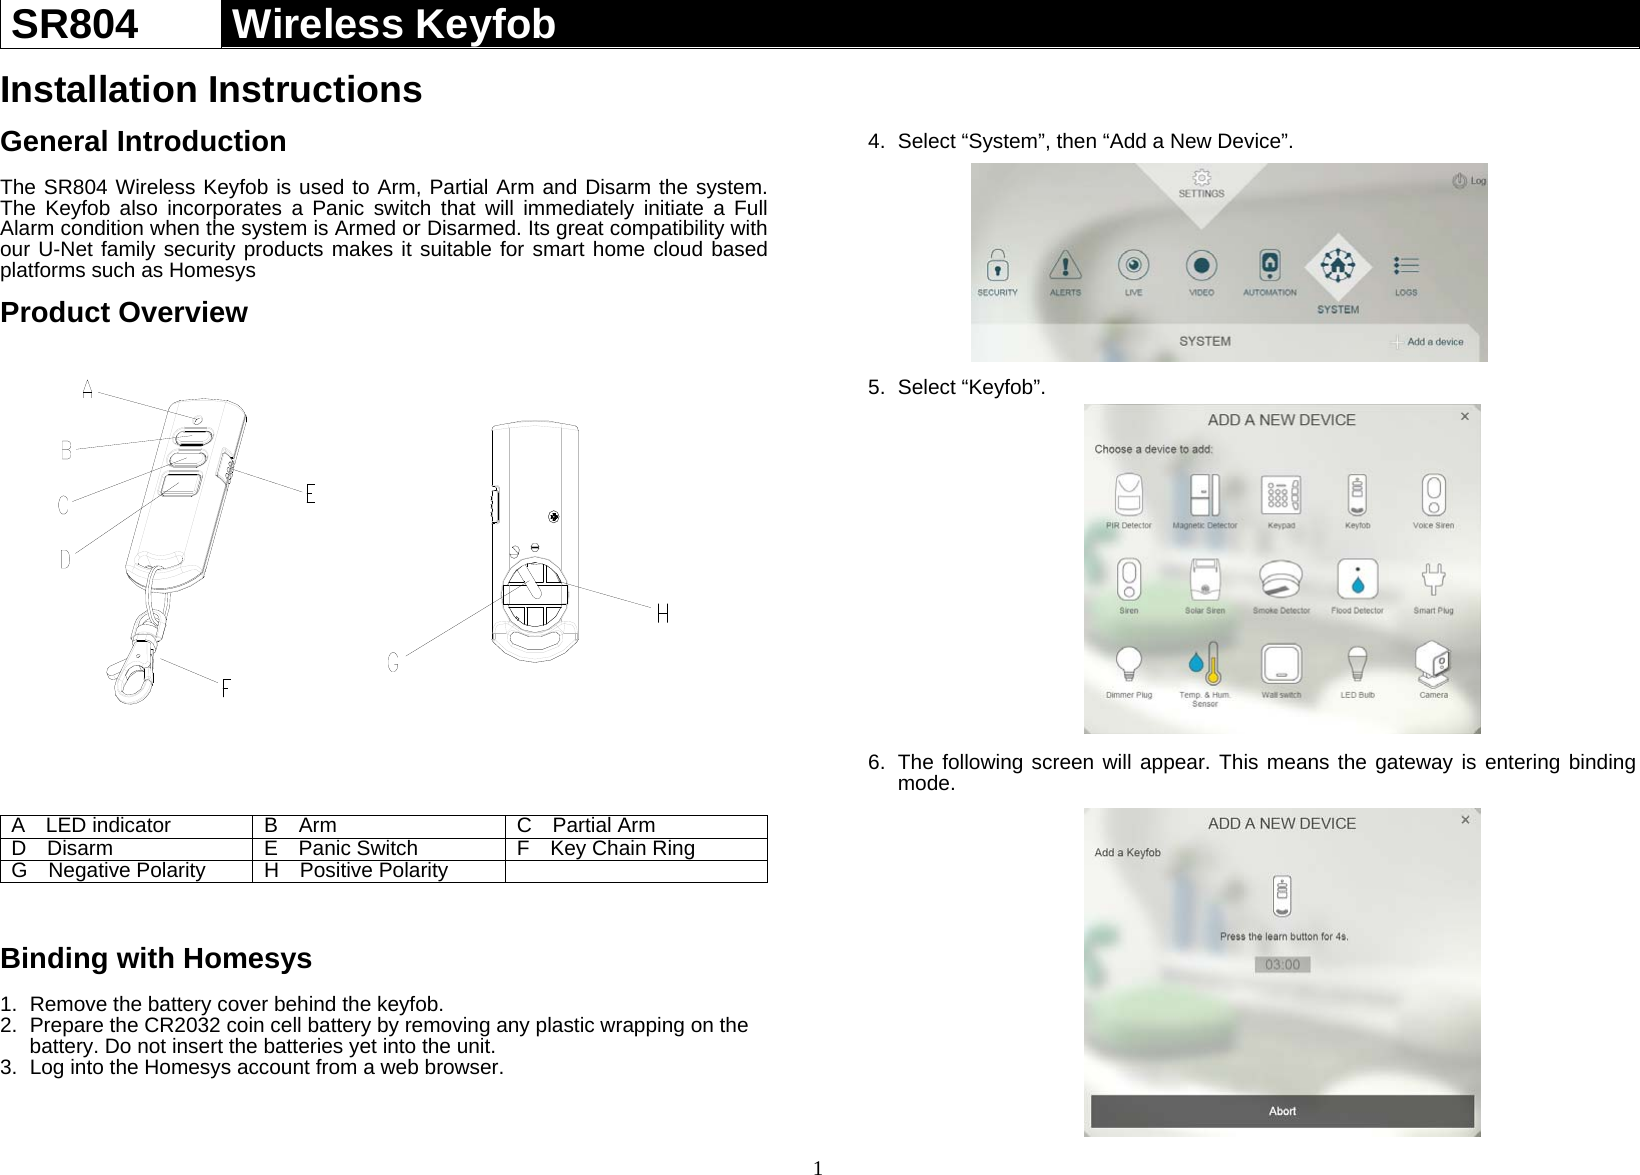 1 SR804  Wireless Keyfob   Installation Instructions  General Introduction  The SR804 Wireless Keyfob is used to Arm, Partial Arm and Disarm the system. The Keyfob also incorporates a Panic switch that will immediately initiate a Full Alarm condition when the system is Armed or Disarmed. Its great compatibility with our U-Net family security products makes it suitable for smart home cloud based platforms such as Homesys  Product Overview                  A  LED indicator  B  Arm   C  Partial ArmD  Disarm  E  Panic Switch   F  Key Chain RingG  Negative PolarityH  Positive Polarity    Binding with Homesys  1.  Remove the battery cover behind the keyfob. 2.  Prepare the CR2032 coin cell battery by removing any plastic wrapping on the battery. Do not insert the batteries yet into the unit. 3.  Log into the Homesys account from a web browser.    4.  Select “System”, then “Add a New Device”.         5. Select “Keyfob”.                  6.  The following screen will appear. This means the gateway is entering binding mode.                  